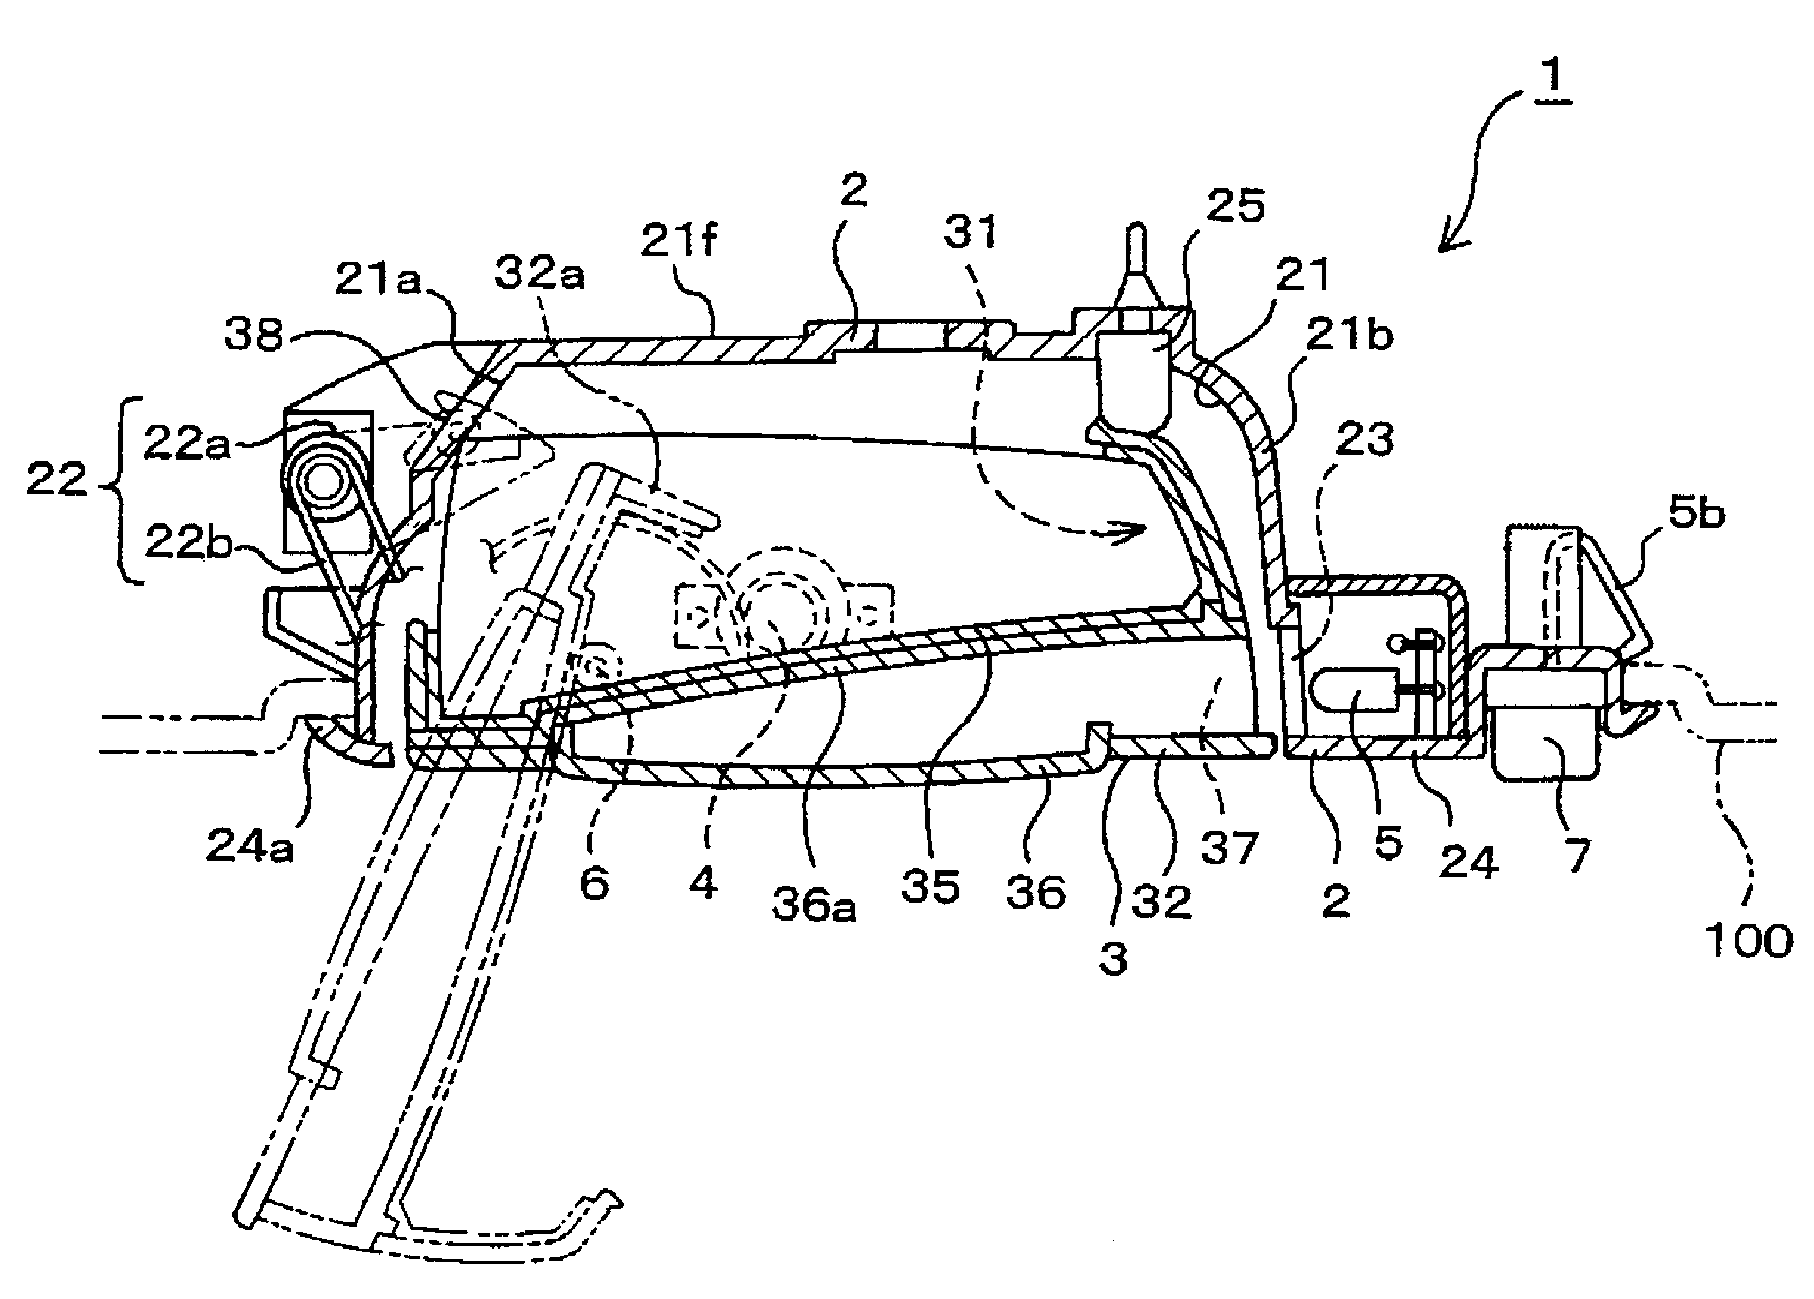 Vehicle console device